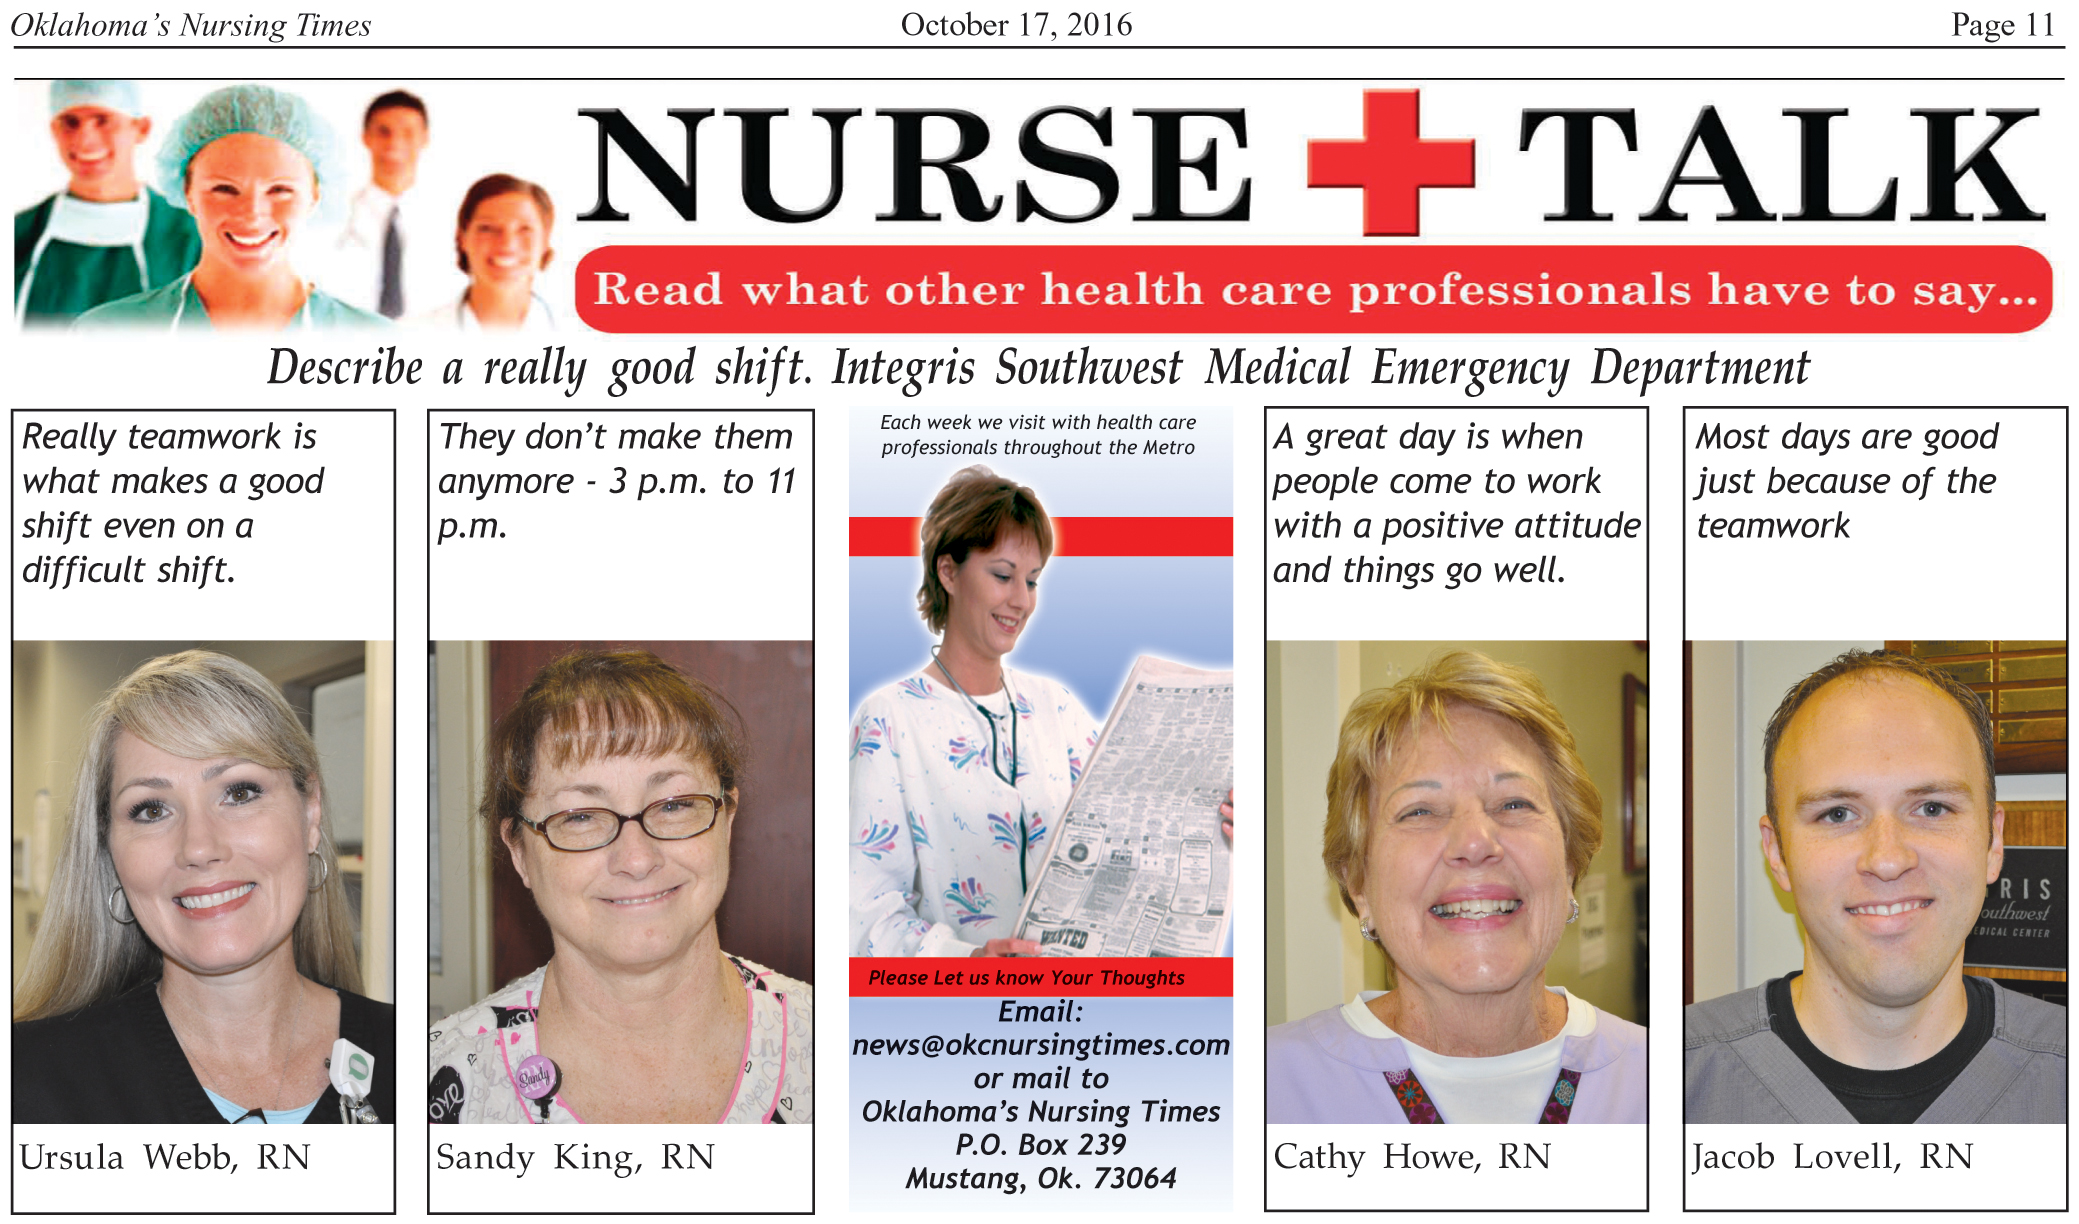 Nurse Essentials You Need for a Great Shift! 